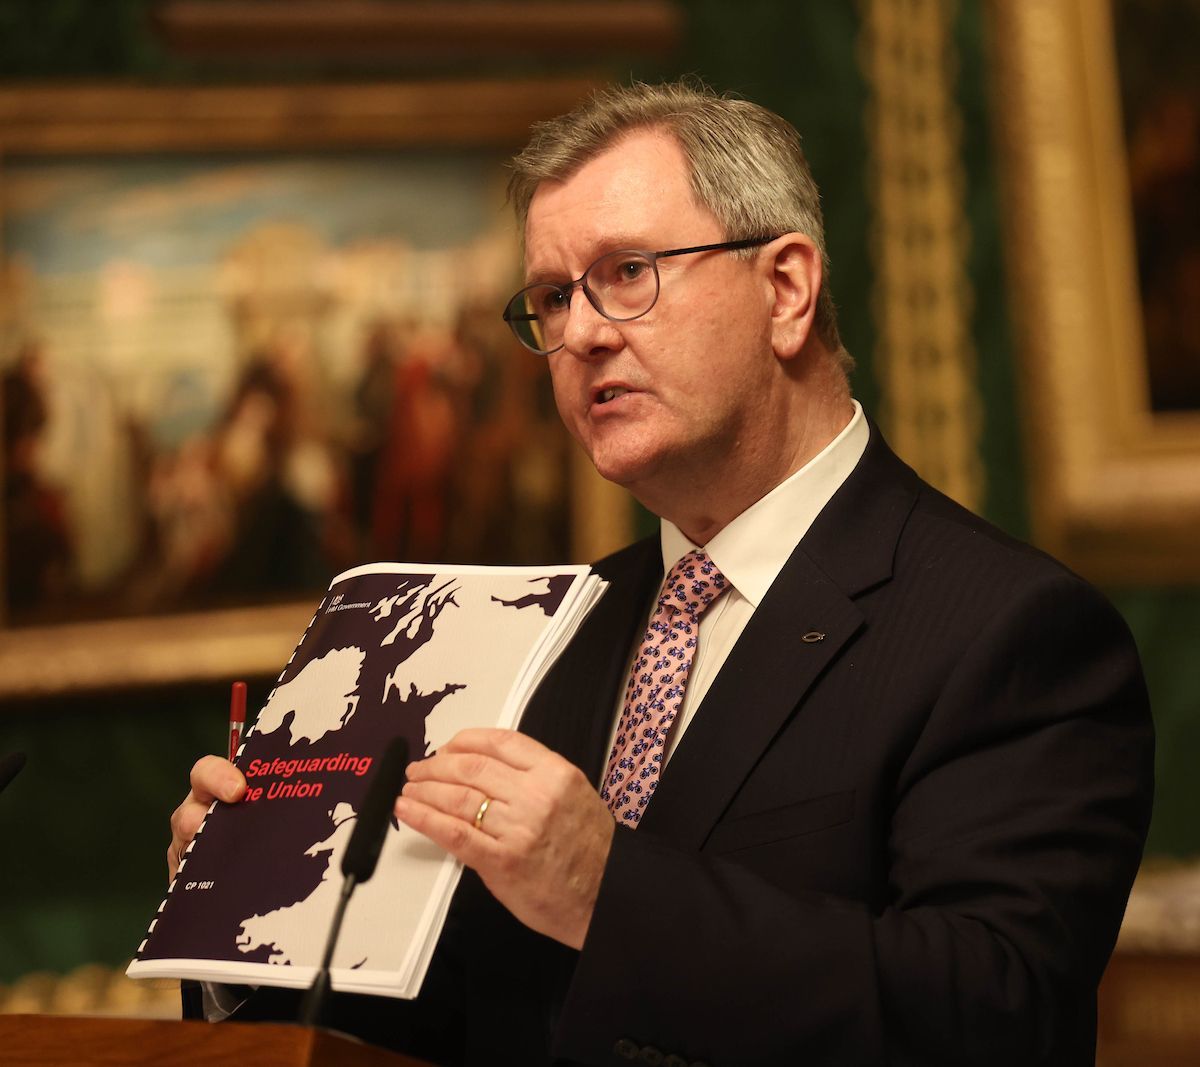 WIN, WIN: Mr Donaldson has managed to postpone a new EU regulation by losing a Stormont vote